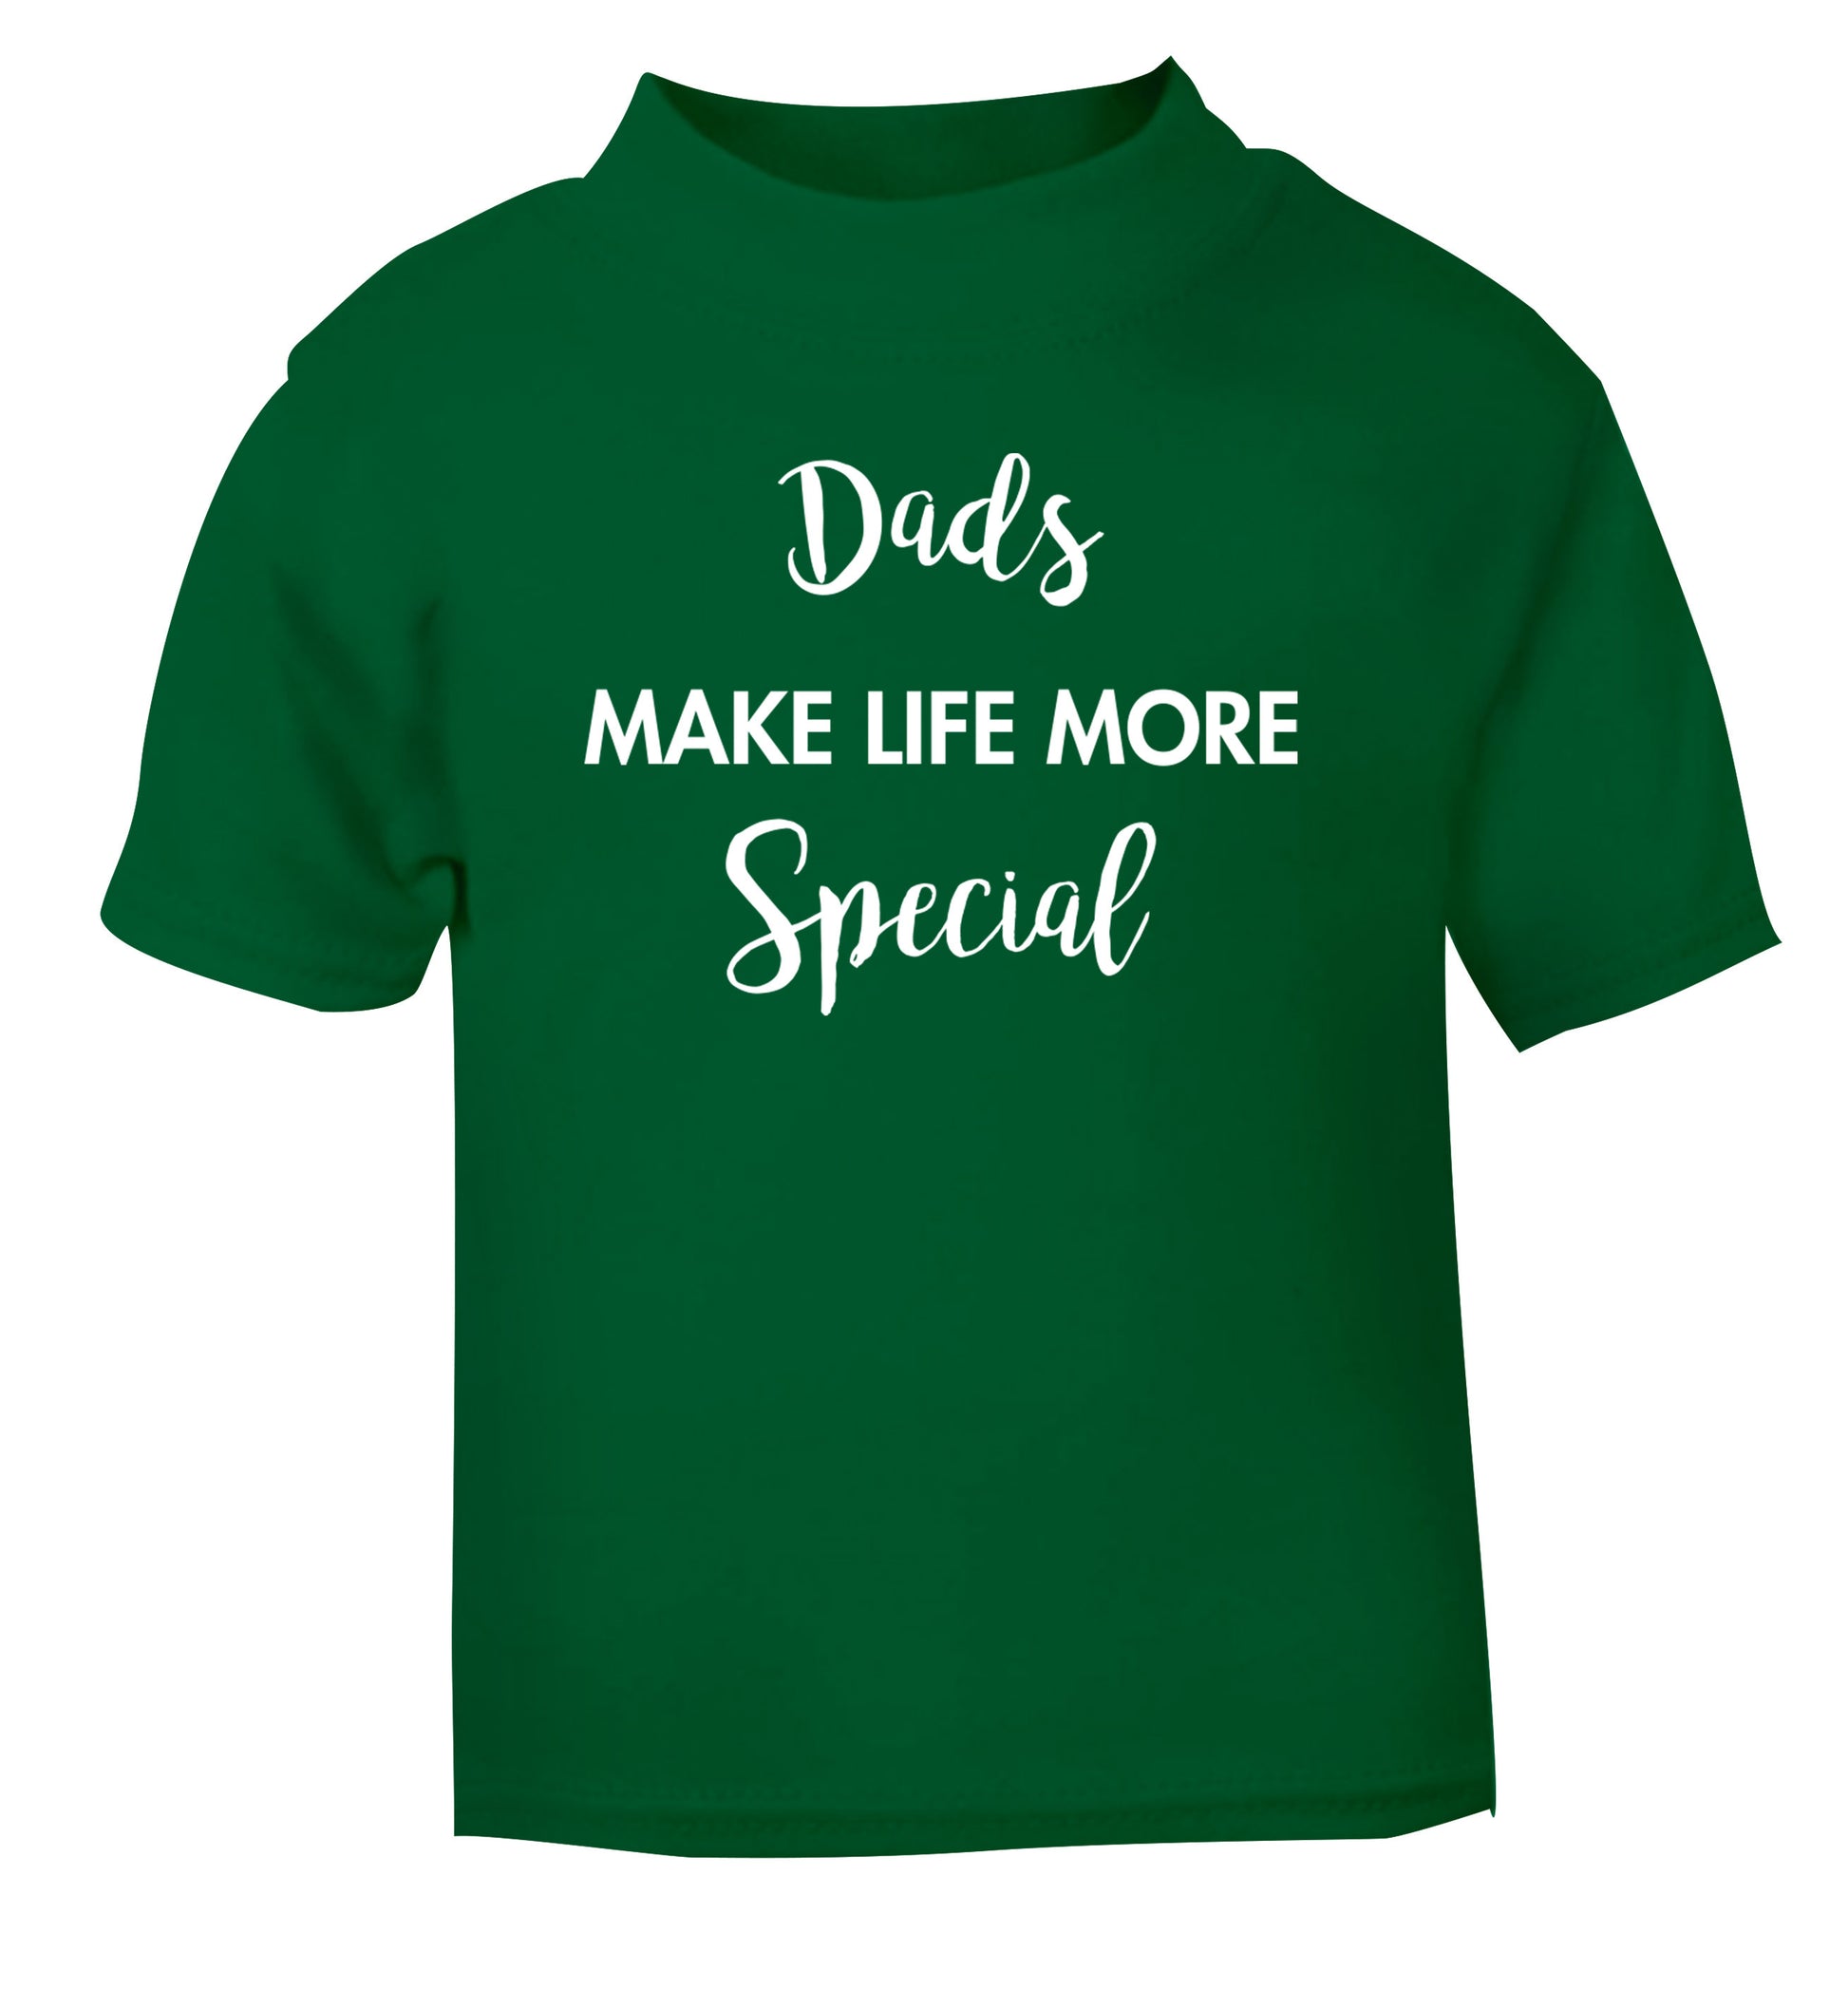 Dads make life more special green Baby Toddler Tshirt 2 Years